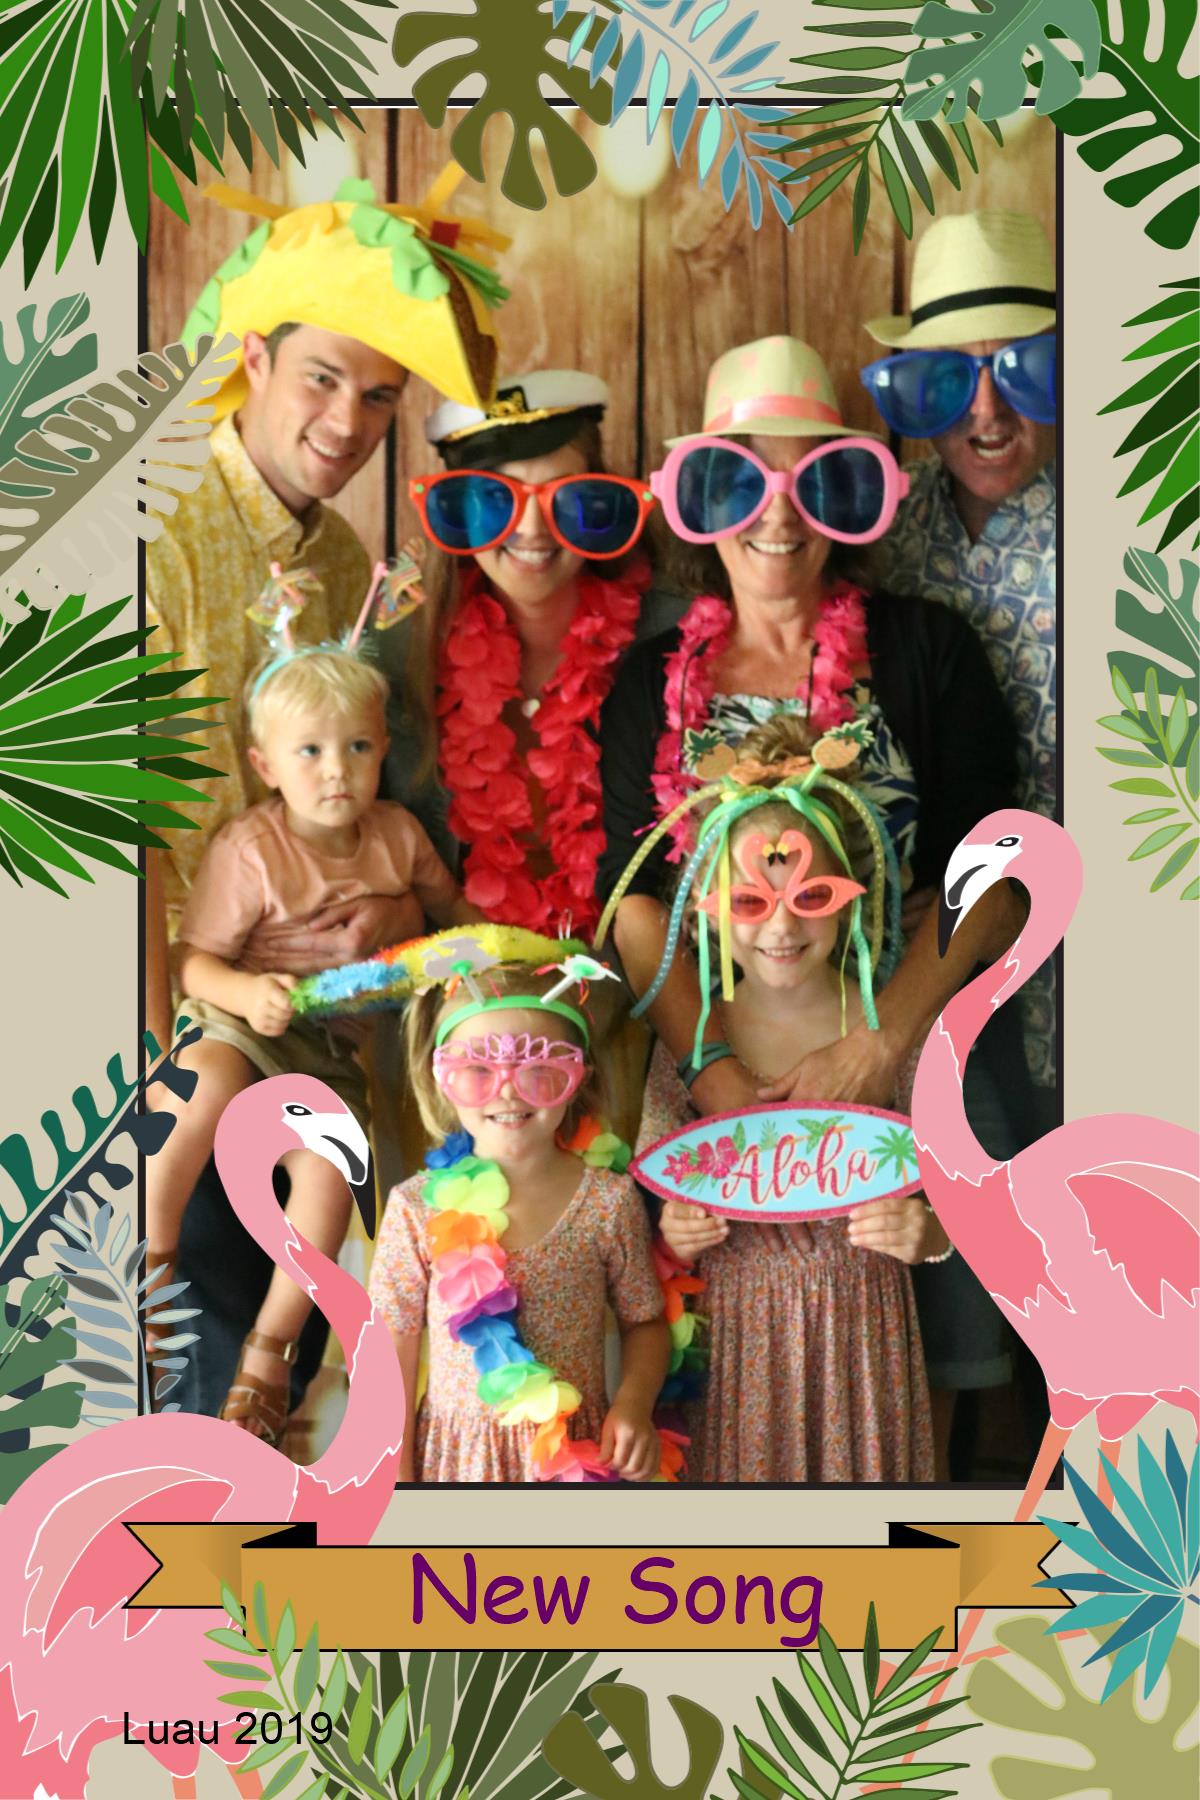 Party, magic mirror photo booth, events